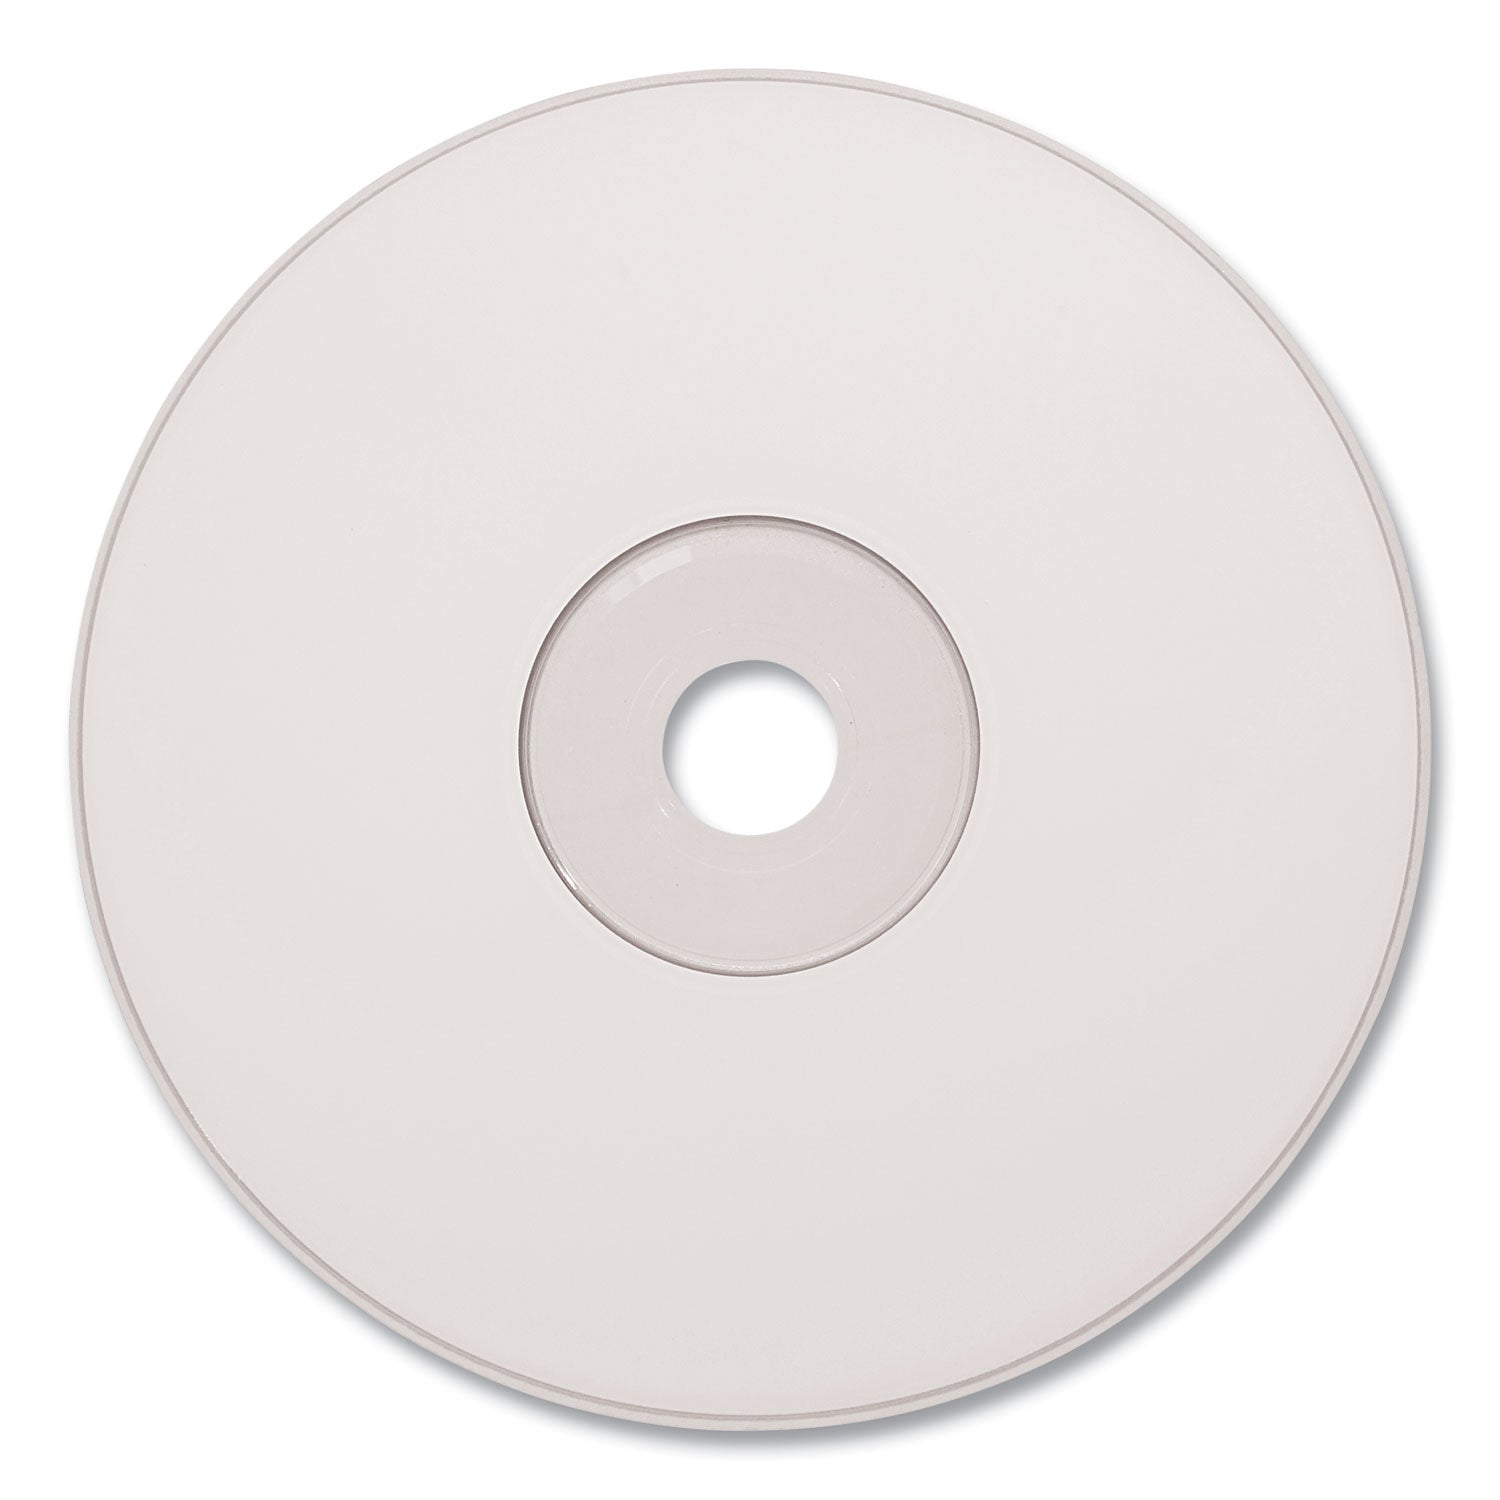 CD-R DataLifePlus Printable Recordable Disc, 700 MB/80 min, 52x, Spindle, White, 100/Pack - 